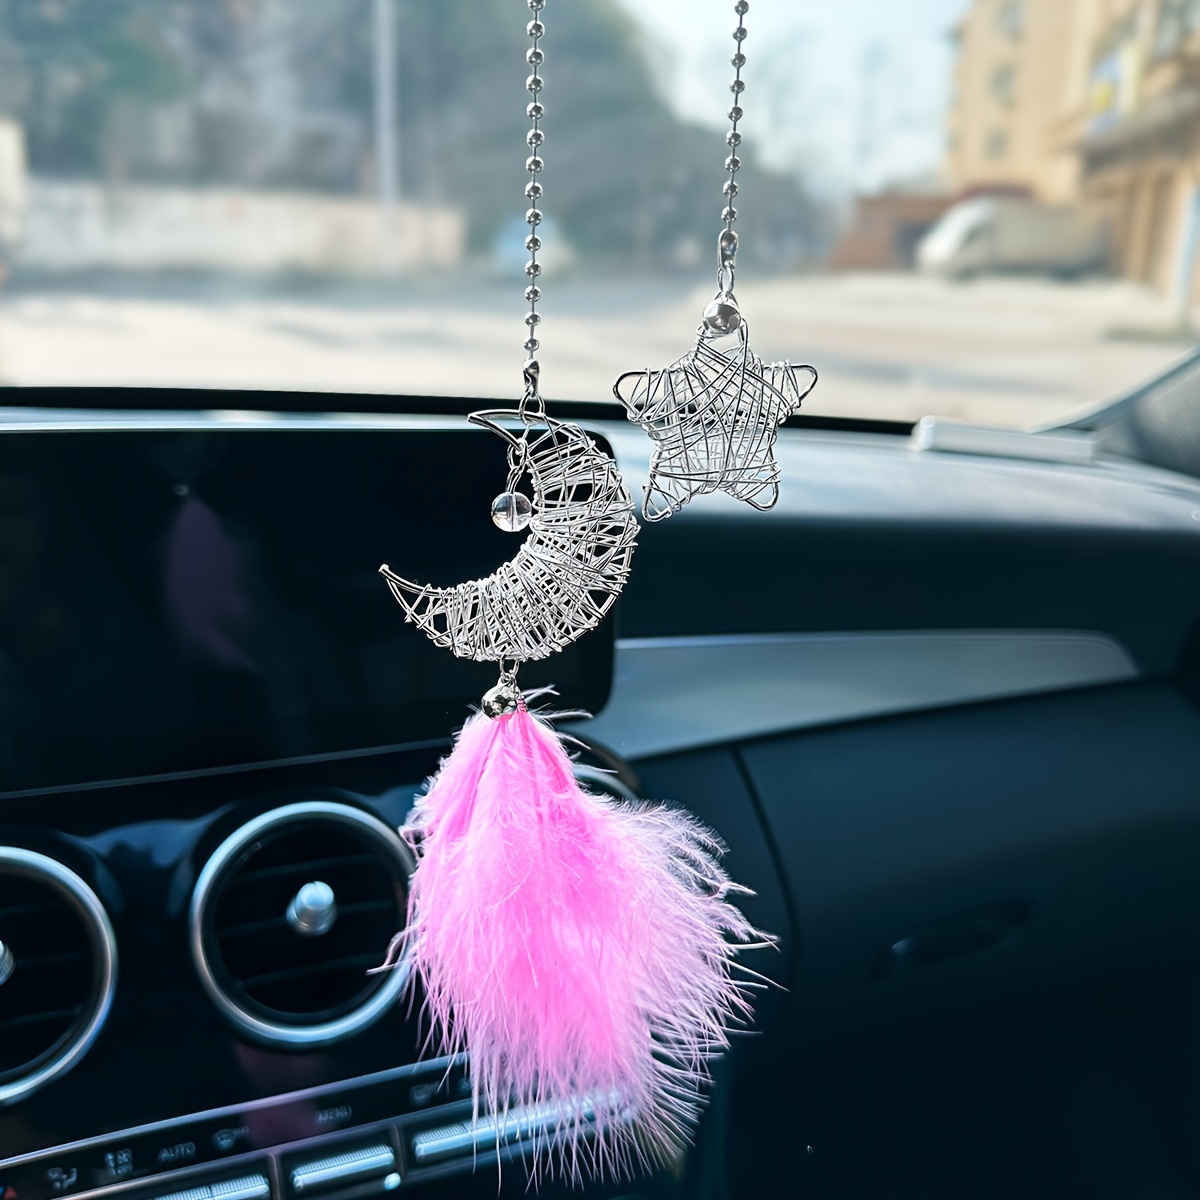 Sparkling Star Moon Car Pendant A Stylish Creative Rearview Mirror